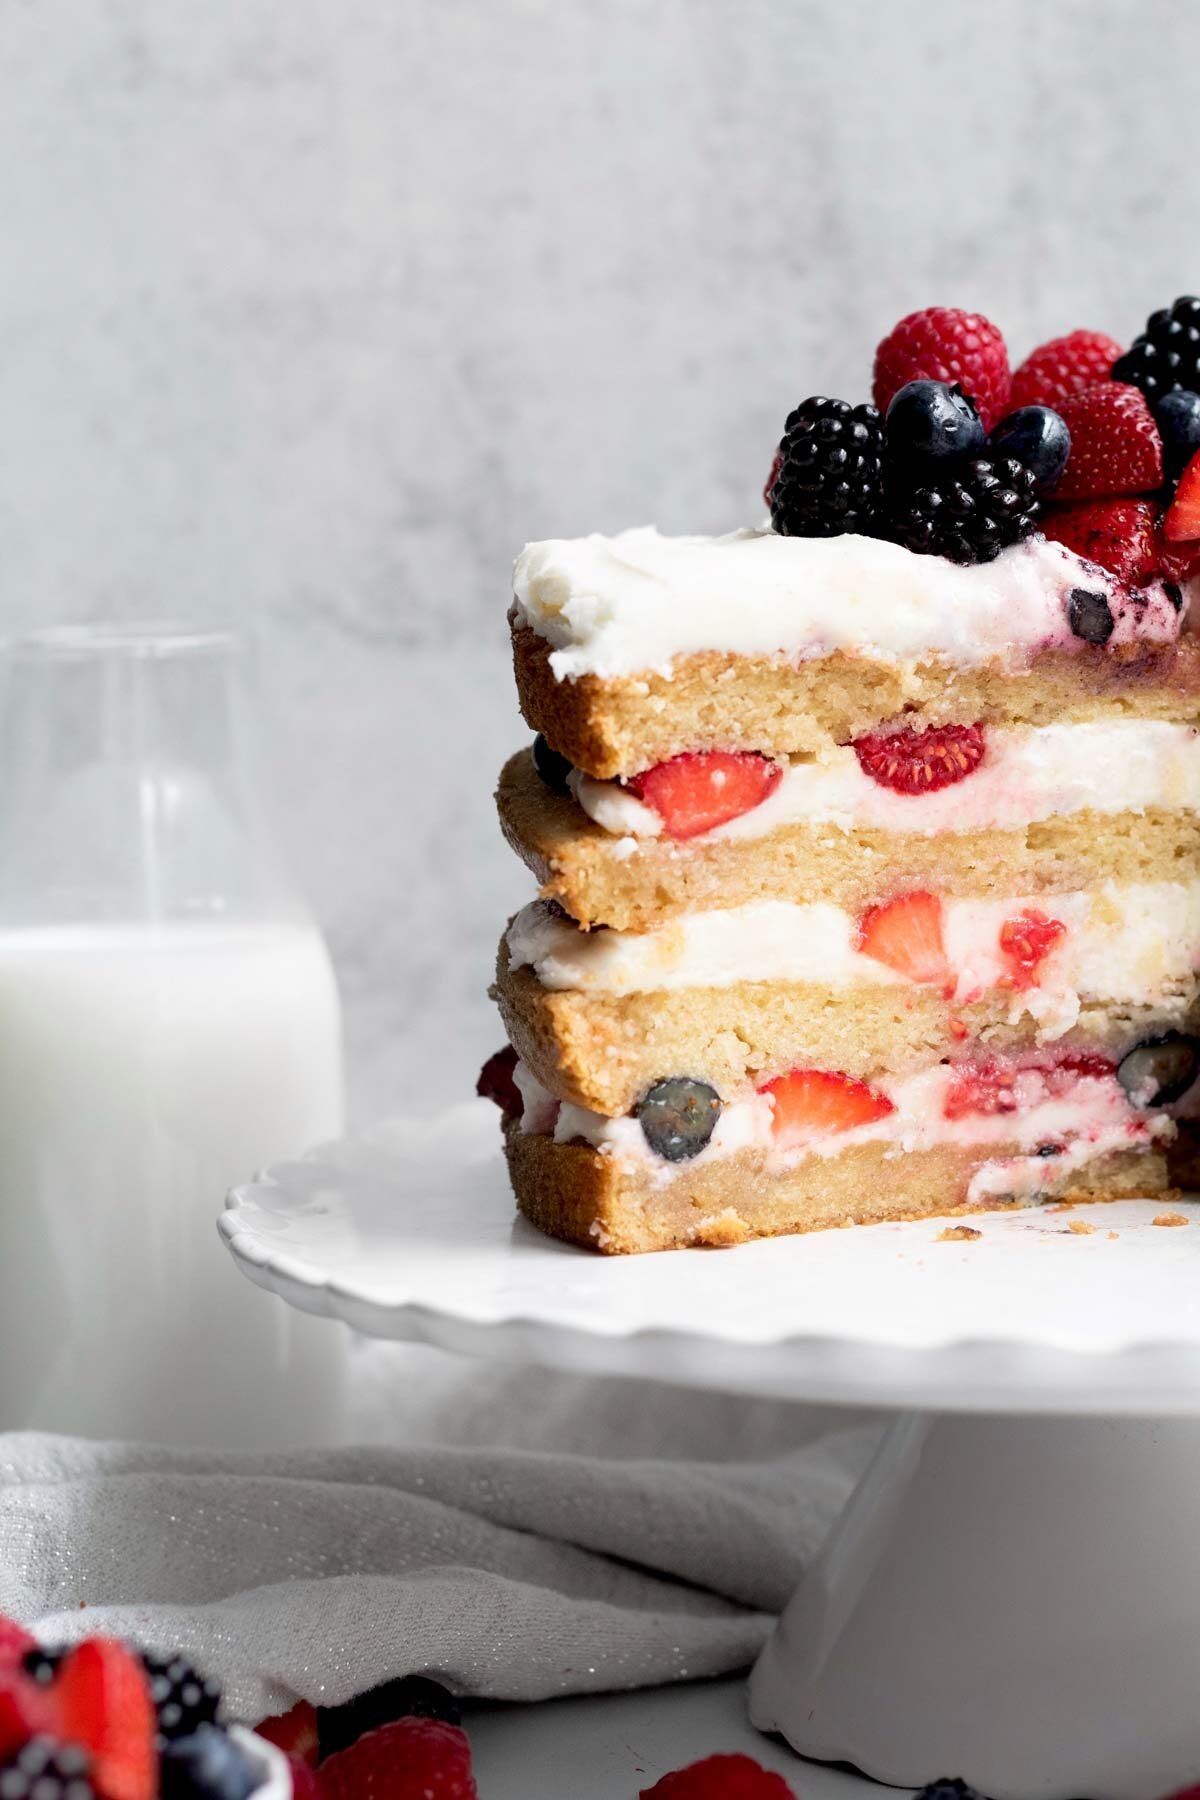 Alternating slices of golden cake and vanilla frosting infused with mixed berries.